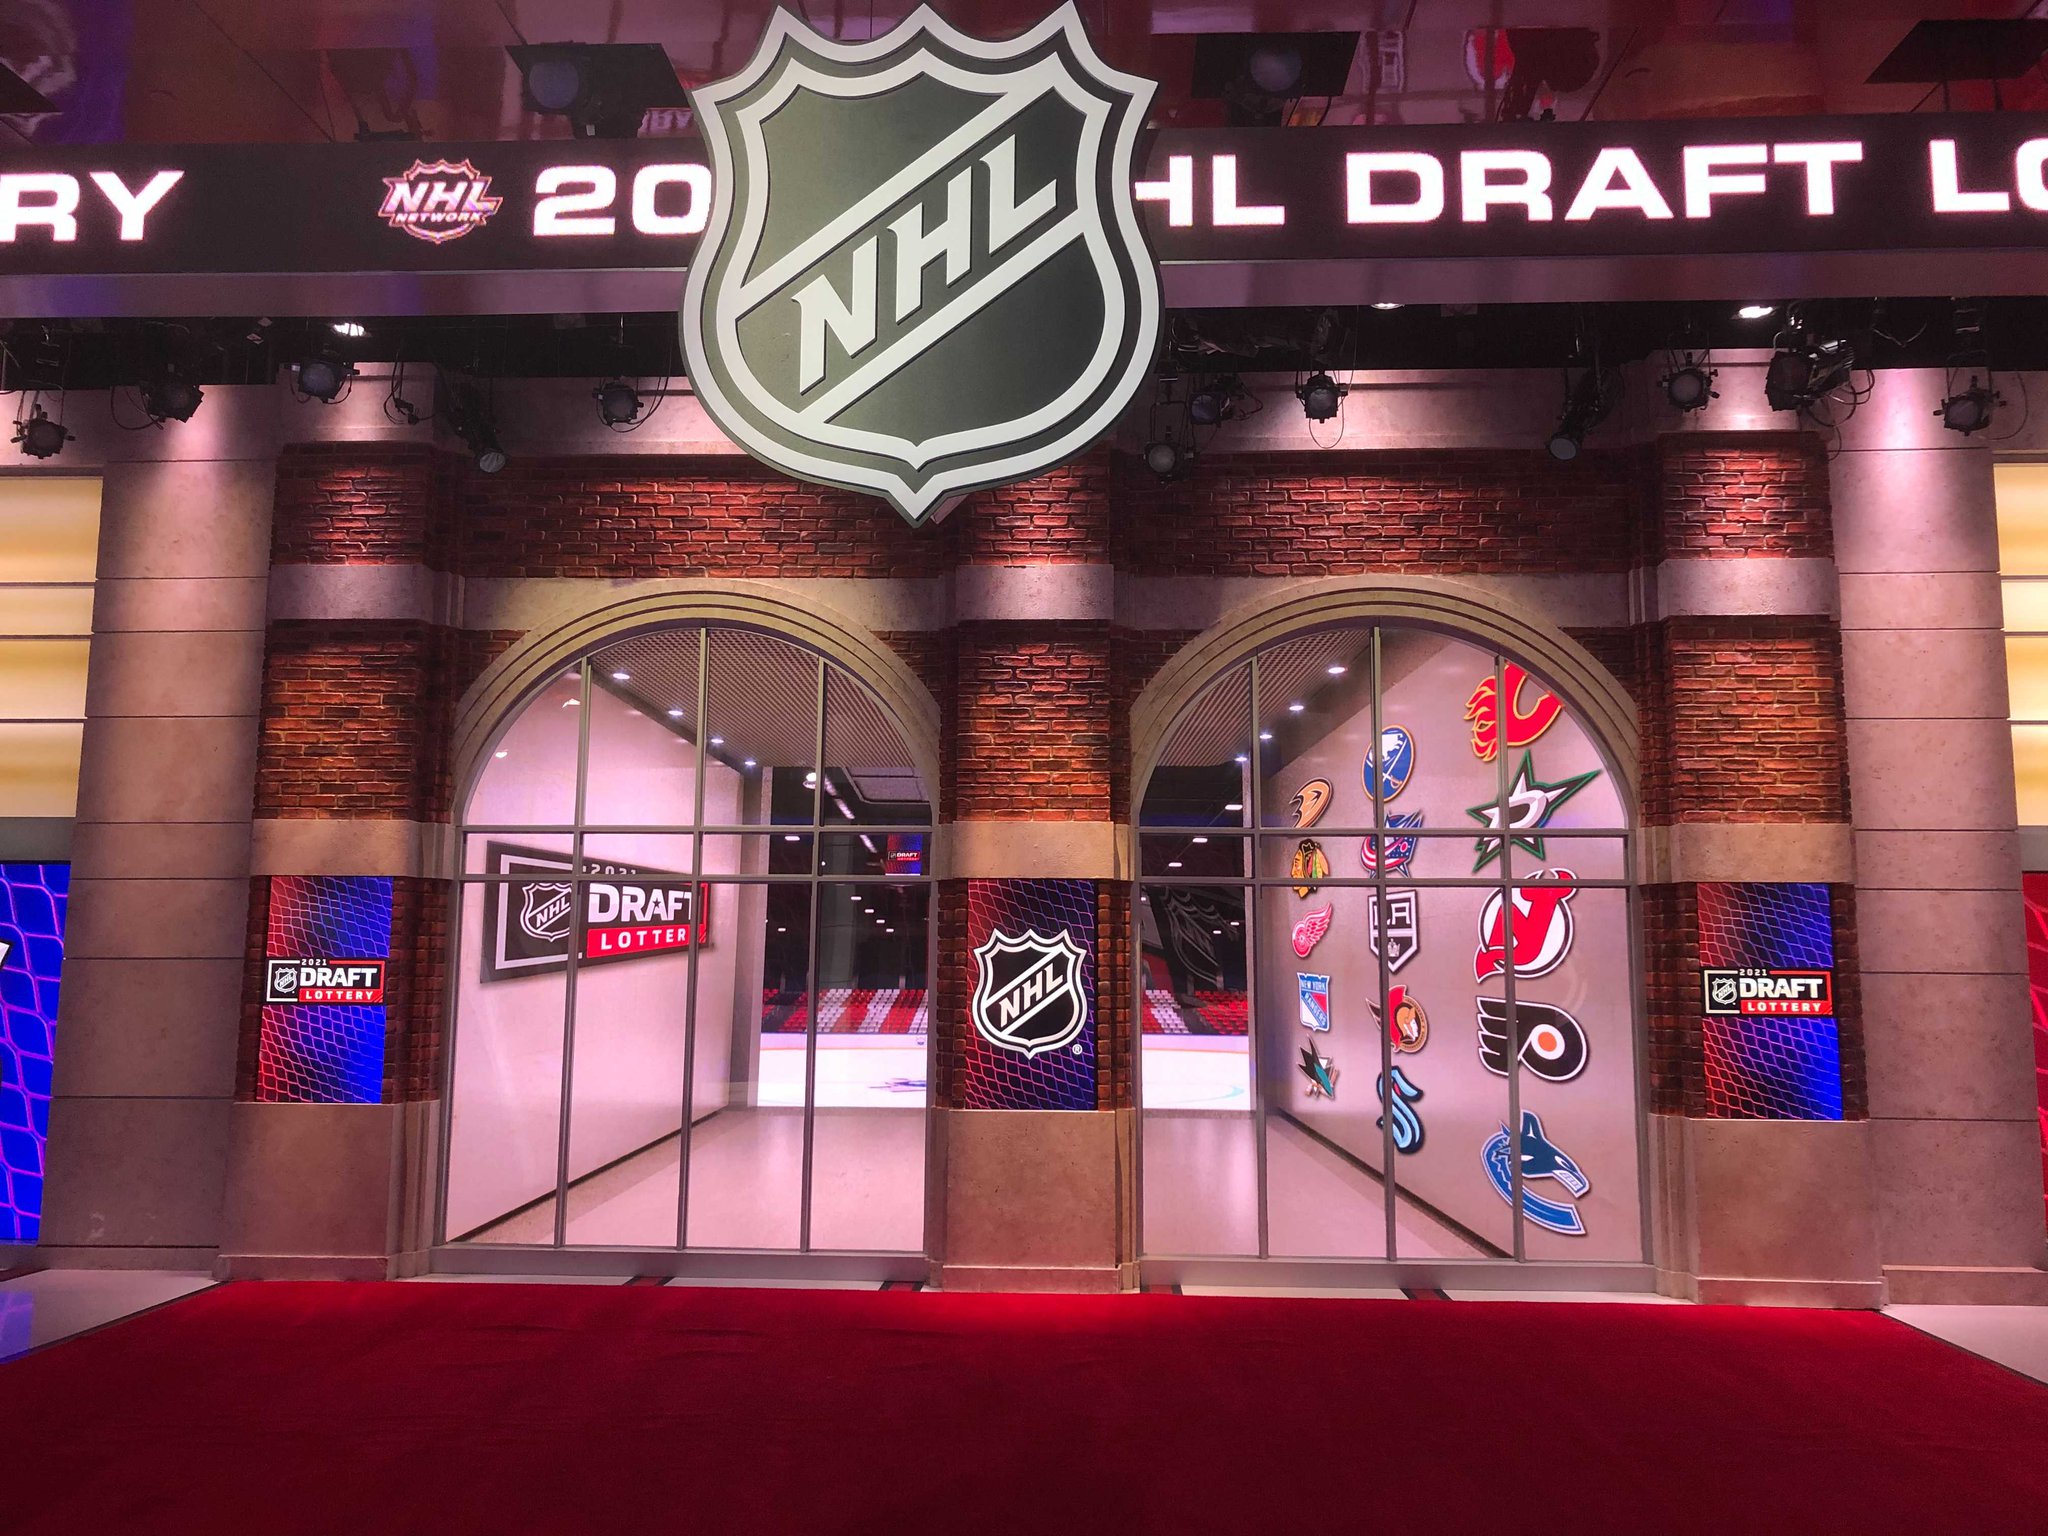 NHL Network on Twitter "The stage is set. Tune in at 7pm ET for the